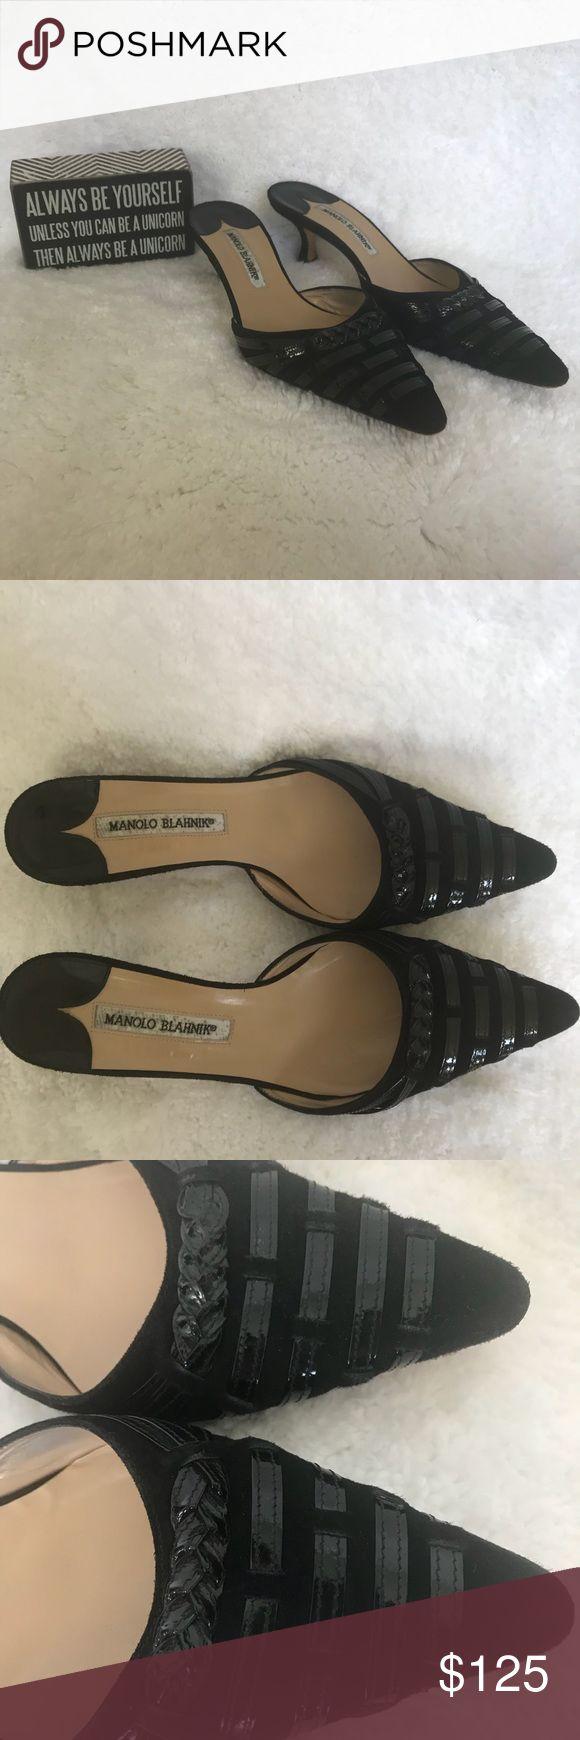 Wedding - Manolo Blahnik Kitten Heel Mules Excellent Used Condition Manolos! Size 7.5 The Wear Can Be Seen On The Bottoms In The Picture. Otherwise They Are … 